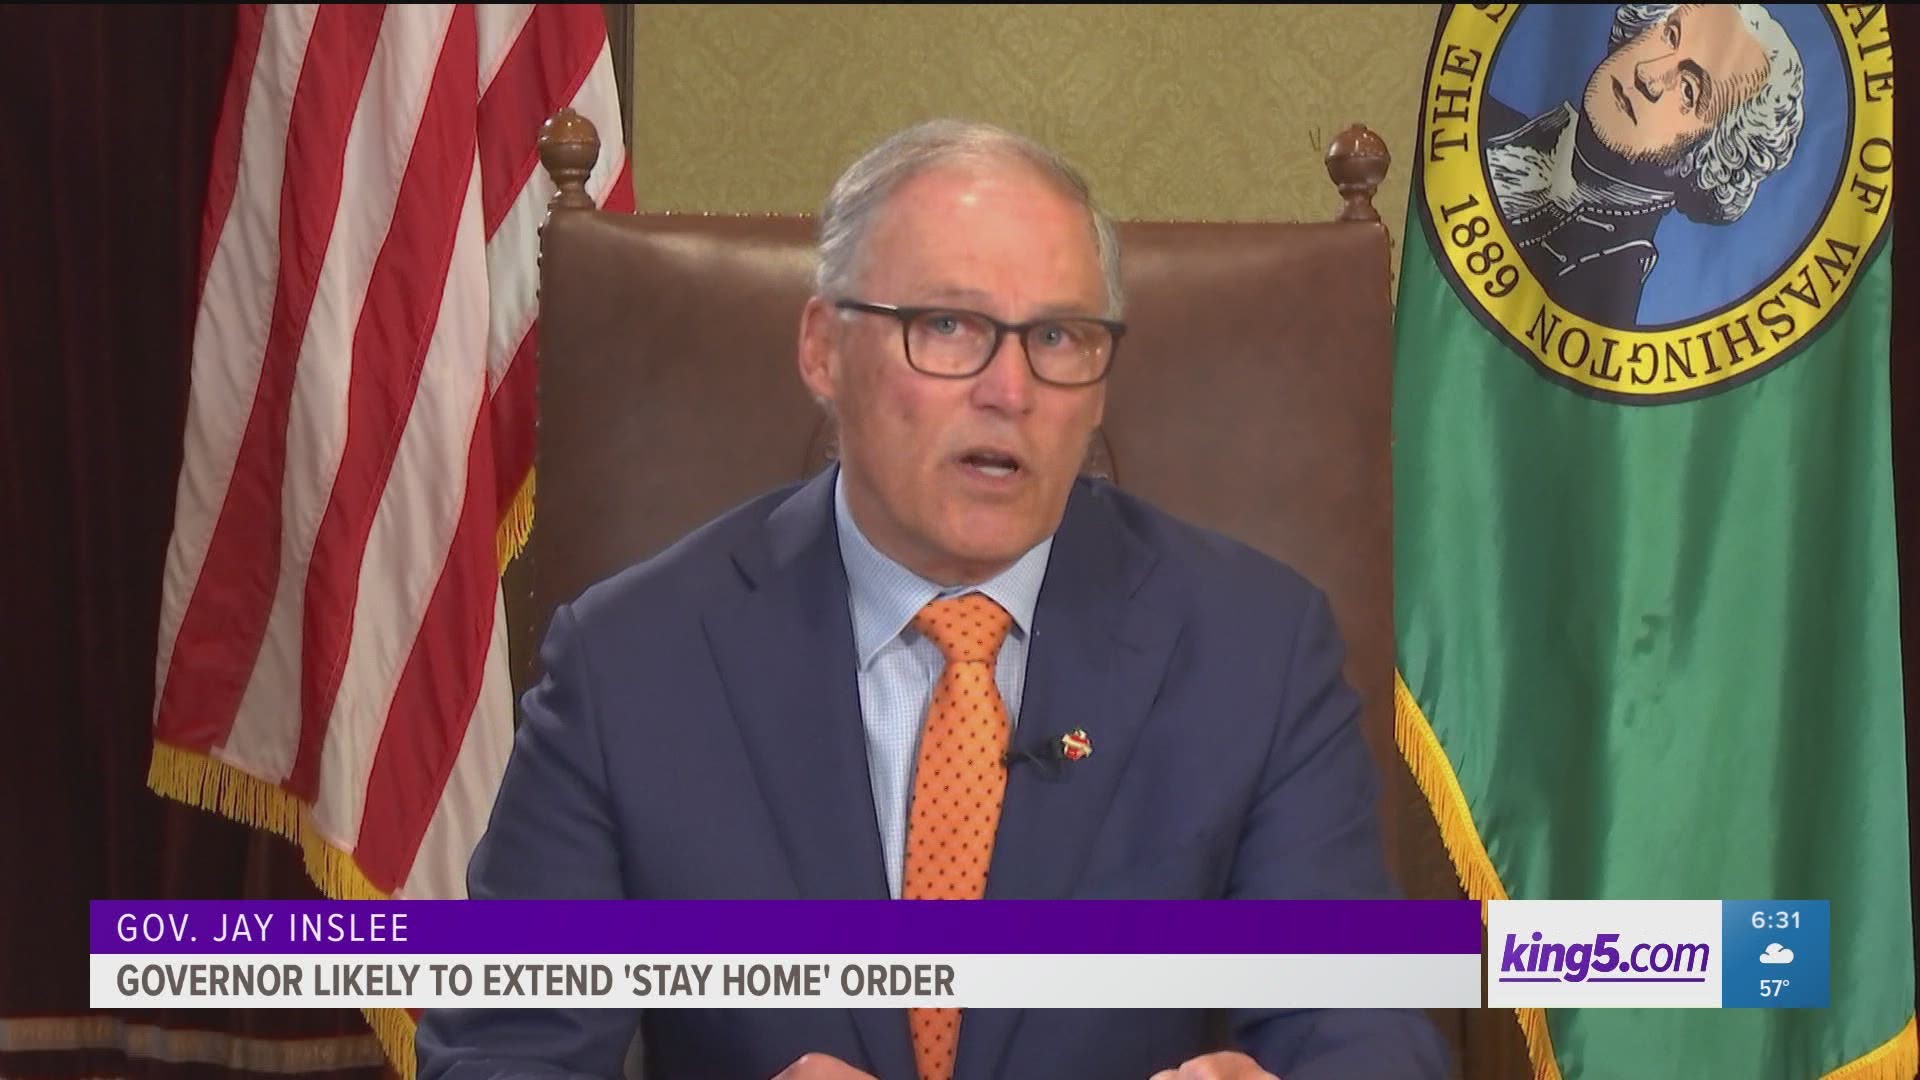 Although Inslee said he might extend the stay home order after May 4, some of the restrictions will be dialed back.